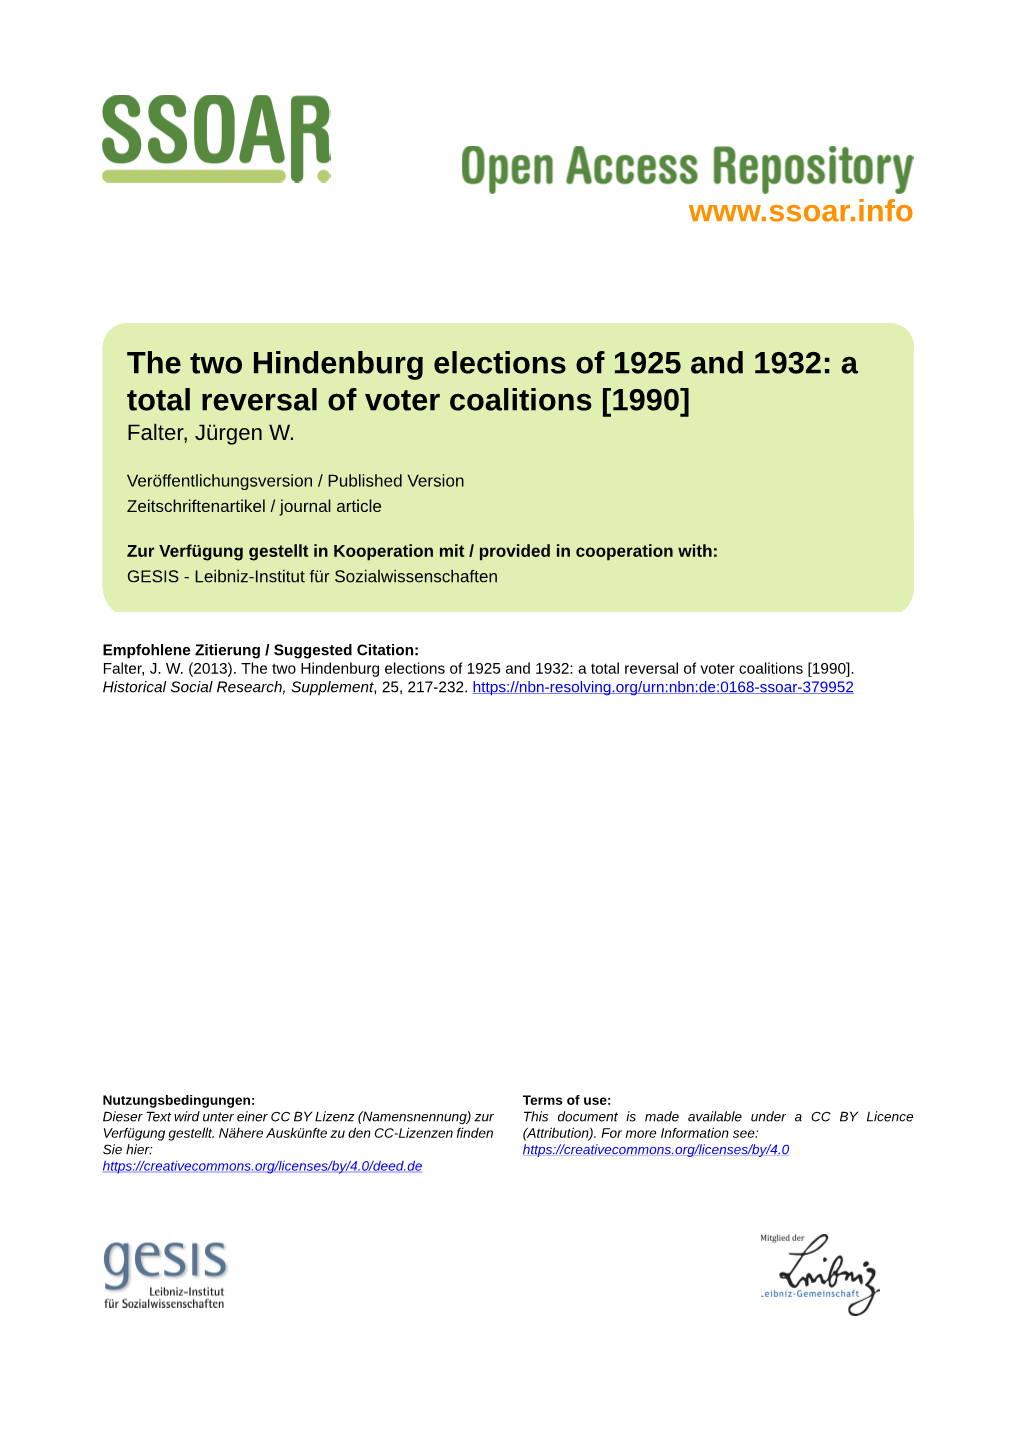 The Two Hindenburg Elections of 1925 and 1932: a Total Reversal of Voter Coalitions [1990] Falter, Jürgen W